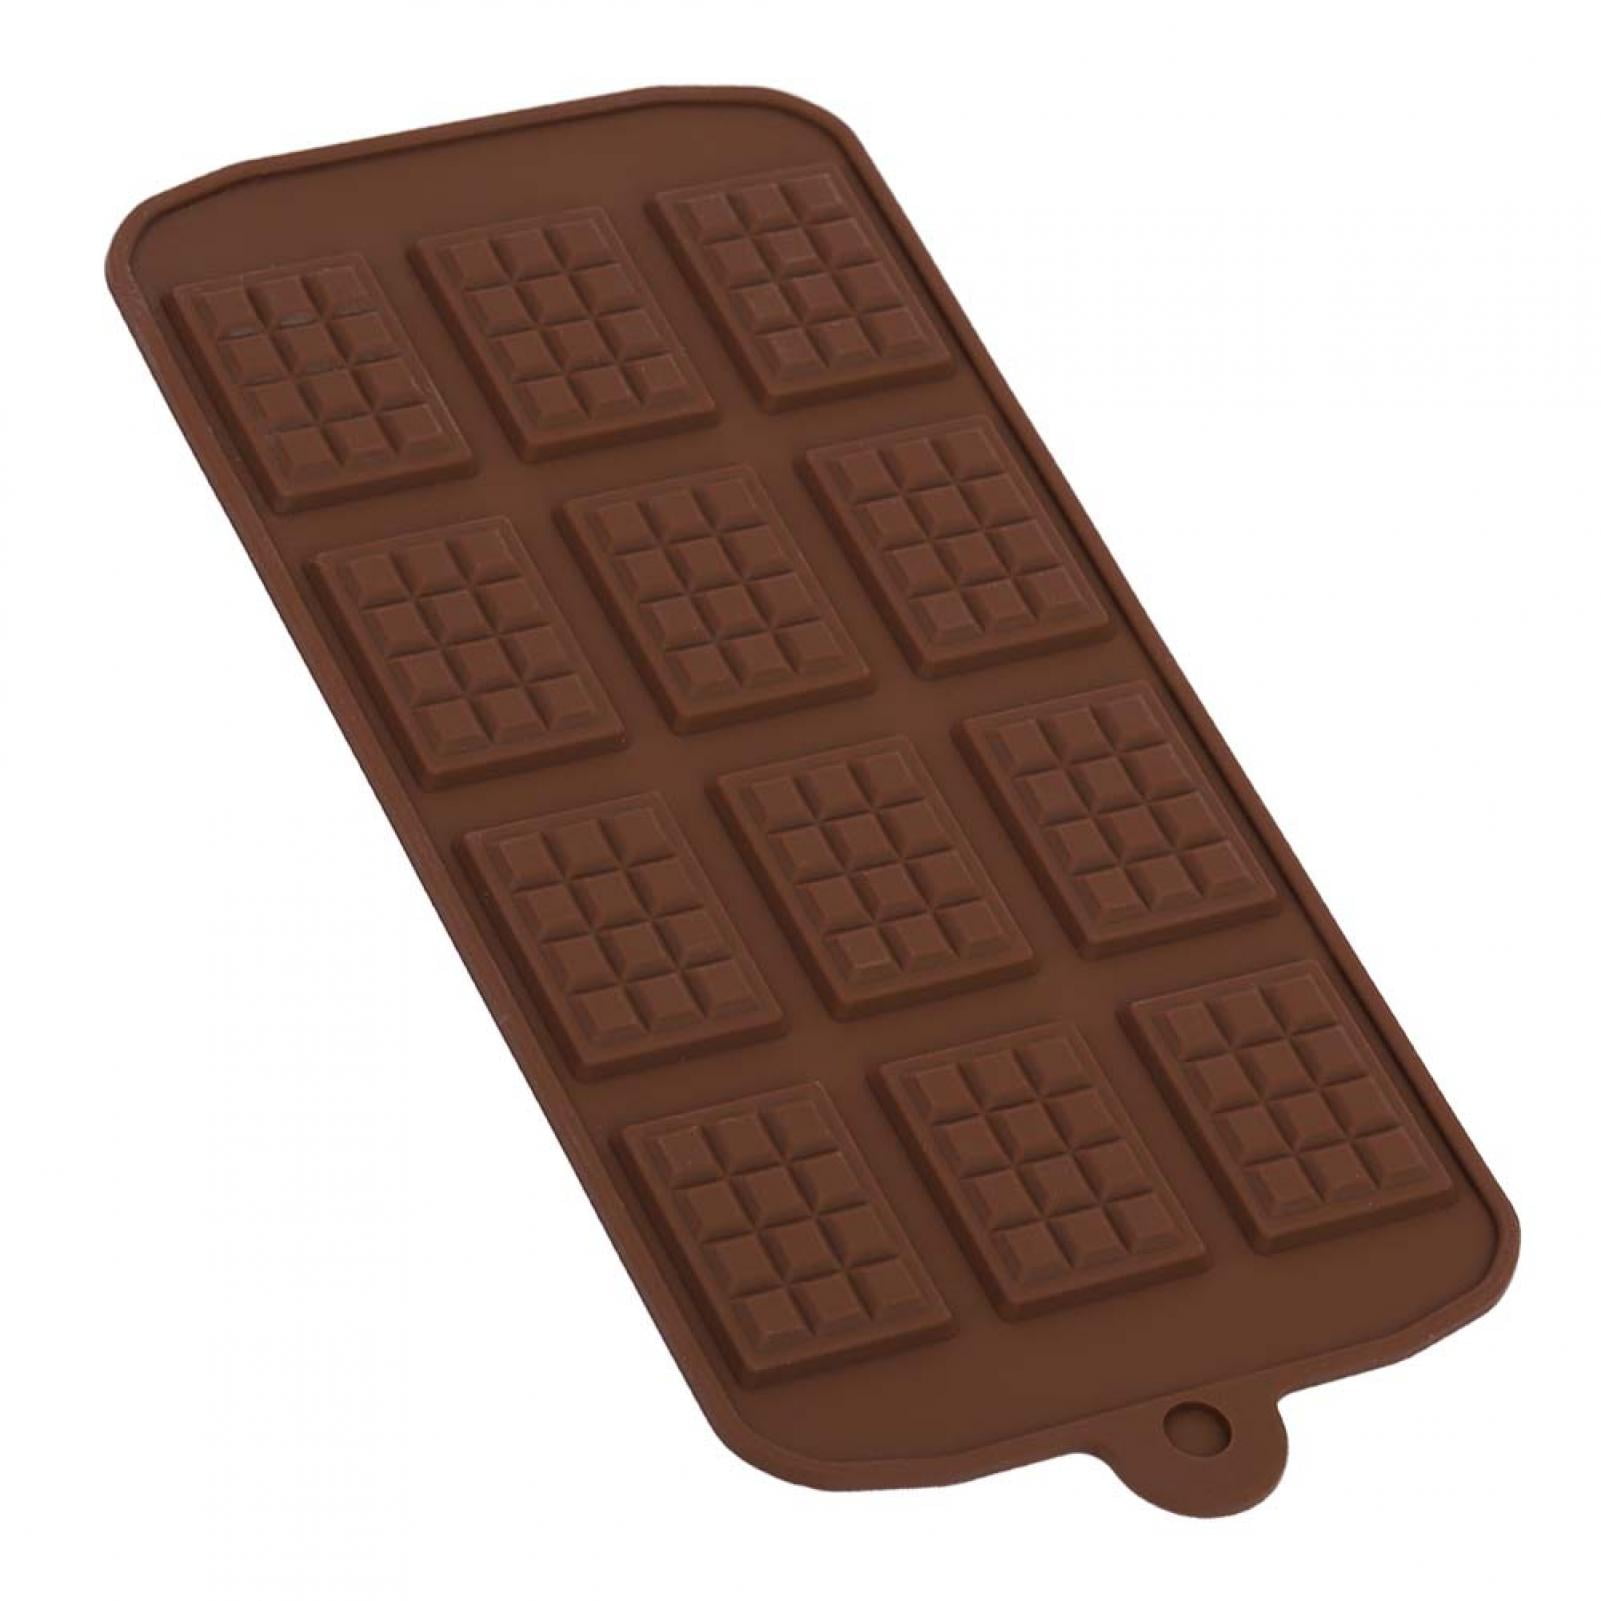 Silicone Waffle Cookies Chocolate Mould Fondant Pastry Mold Cake Mold. 